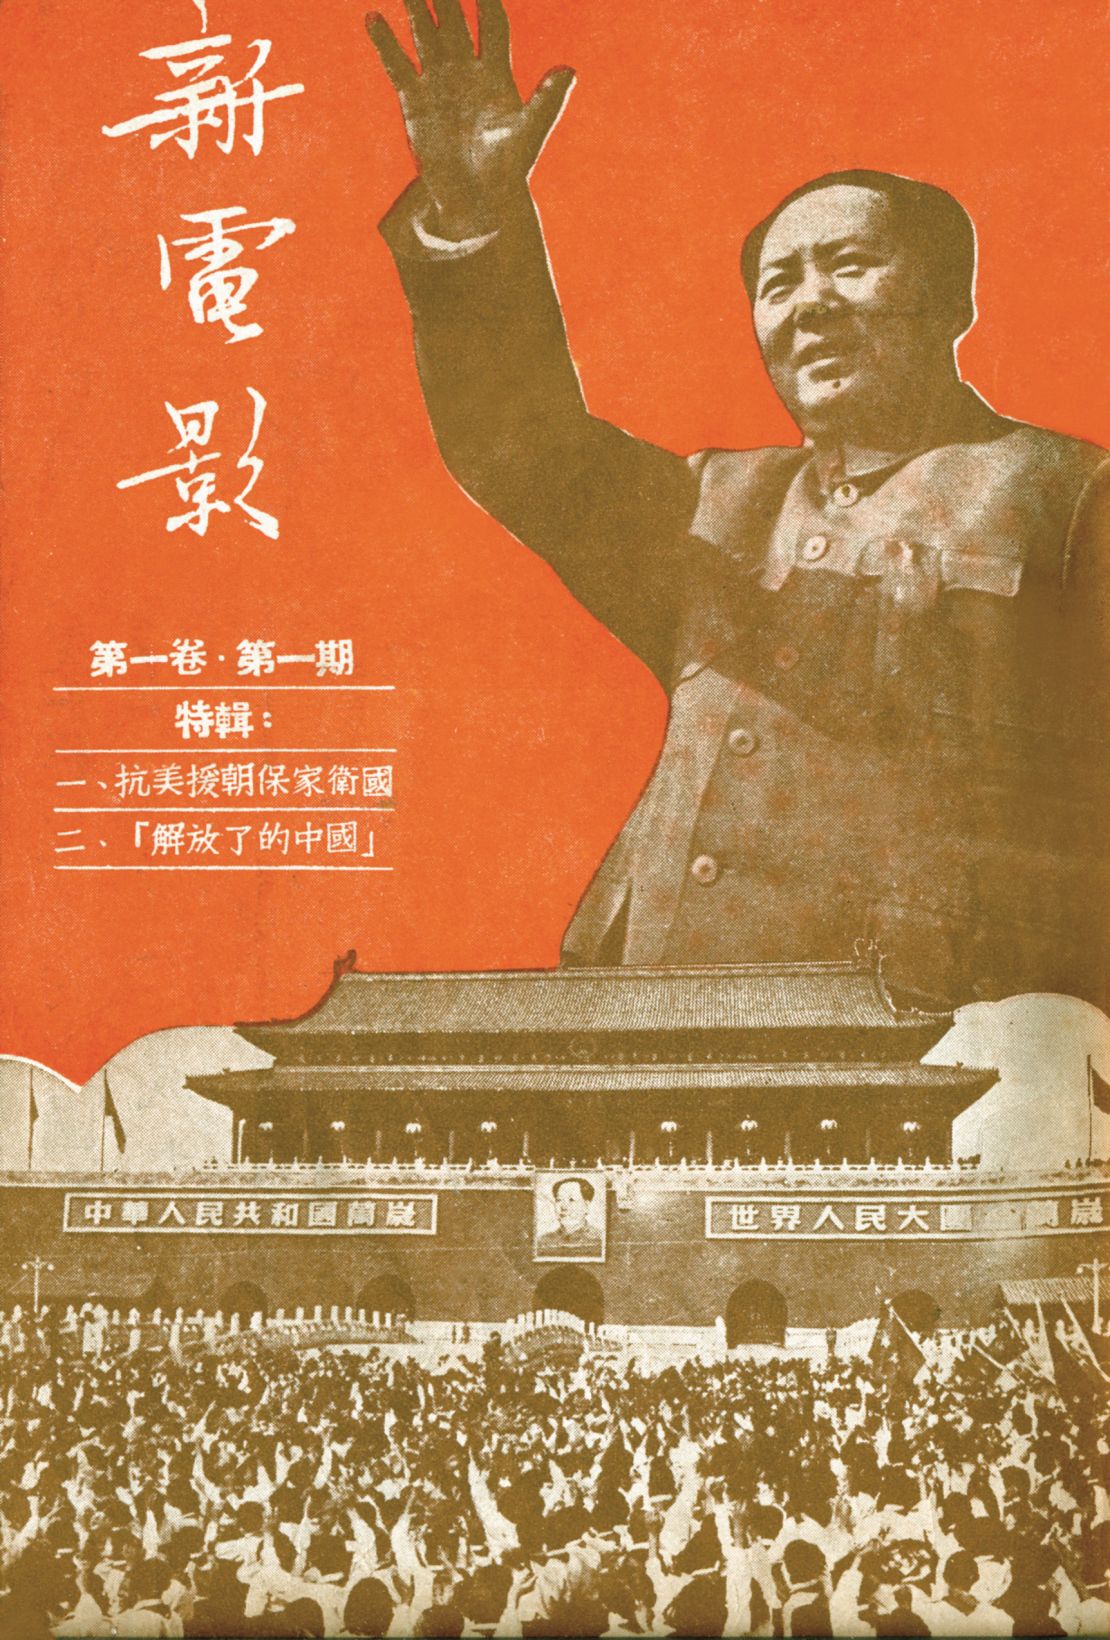 Mao Zedong features on the cover of "New Cinema" magazine two years after his communist government seized power. The industry was effectively dismantled by 1951.